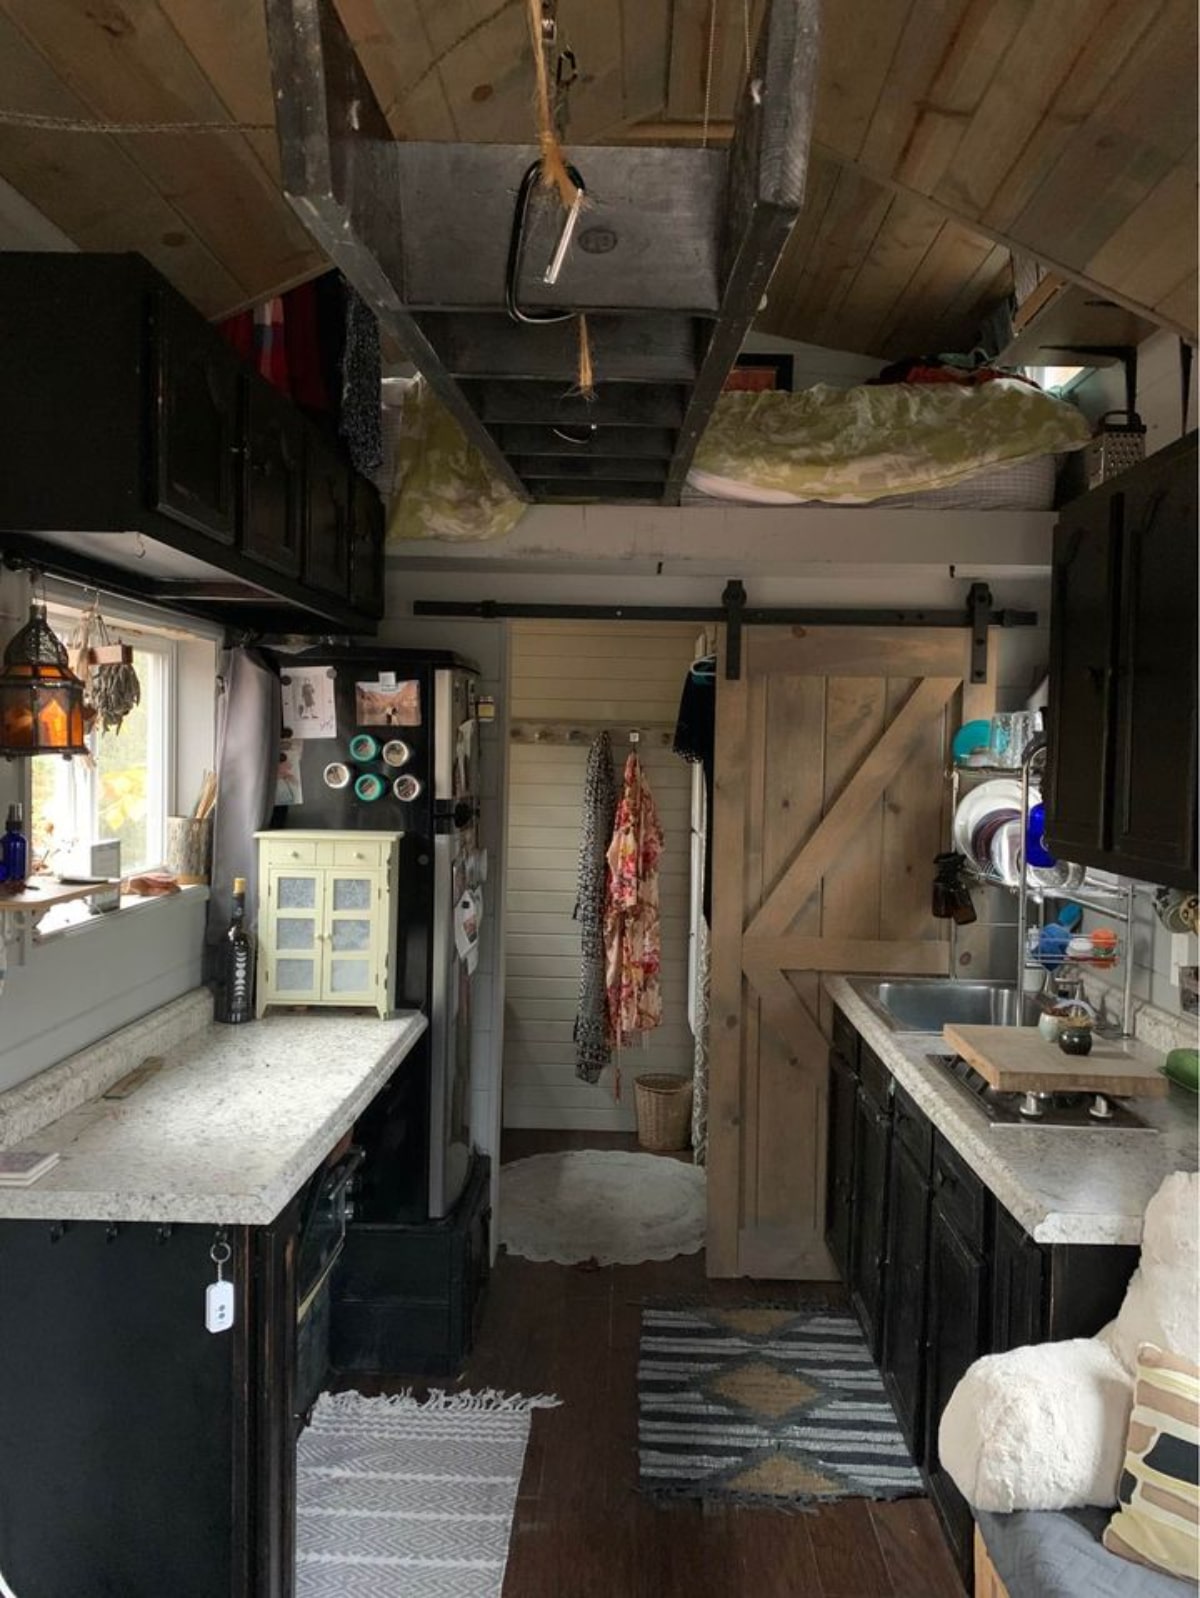 Space of 180 sf Adorable Tiny House on Wheels is well utilized